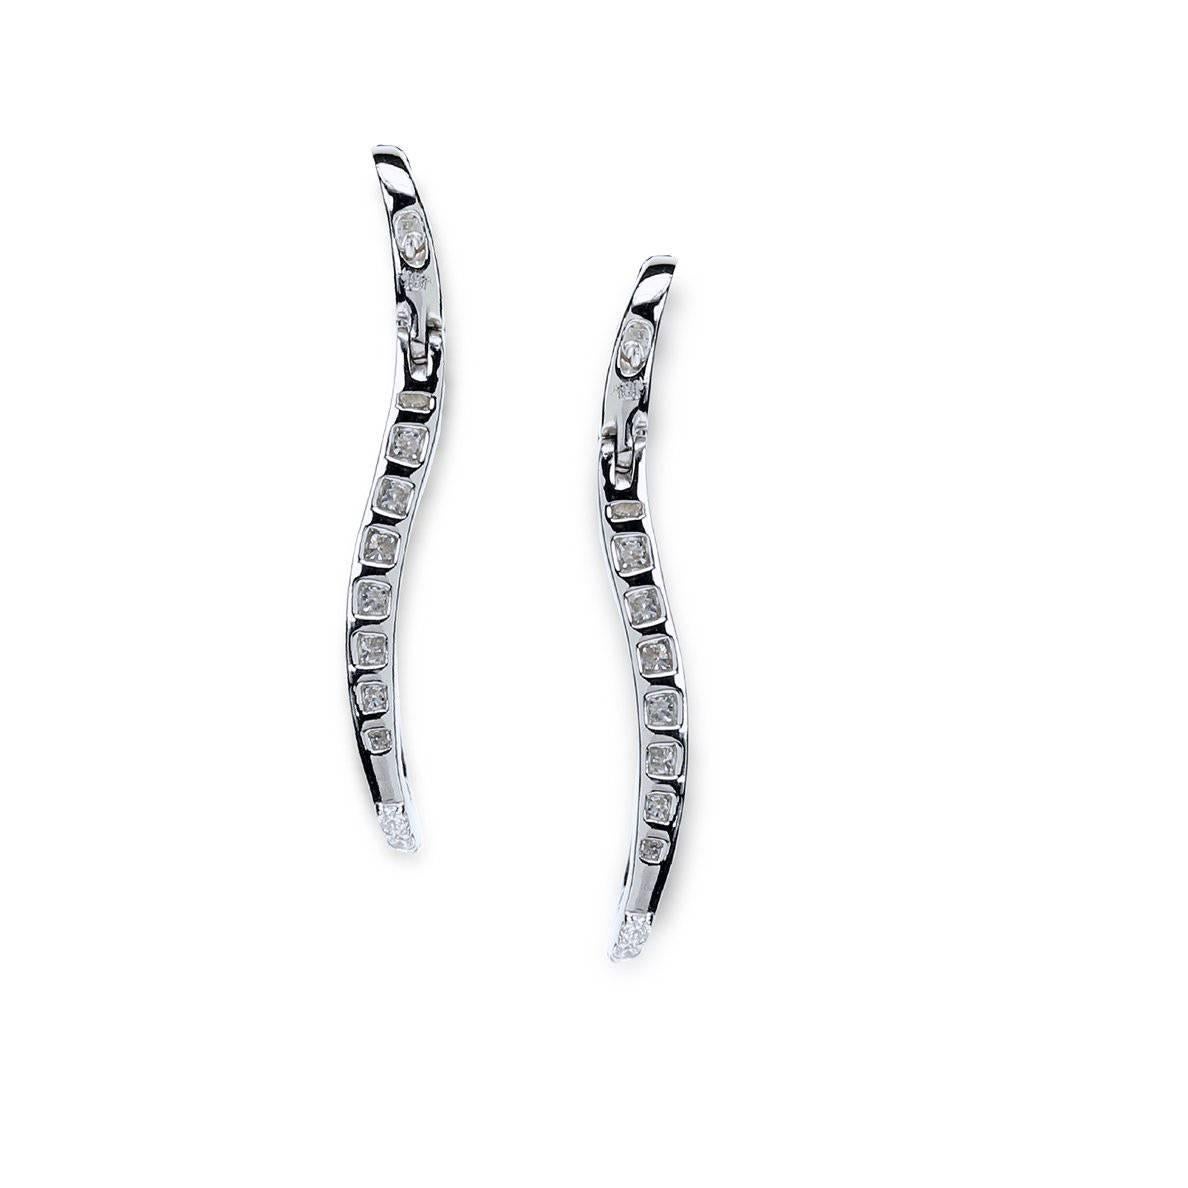 Pair of "Samuel Getz" 18 Karat White Gold Signature "S" Diamond Hoop Earrings Featuring [78] Graduated Pavé Set Round Brilliant Diamonds with an approximate Total Weight of 3.76 Carats of F Color and VS1 - VS2 Clarity.

The